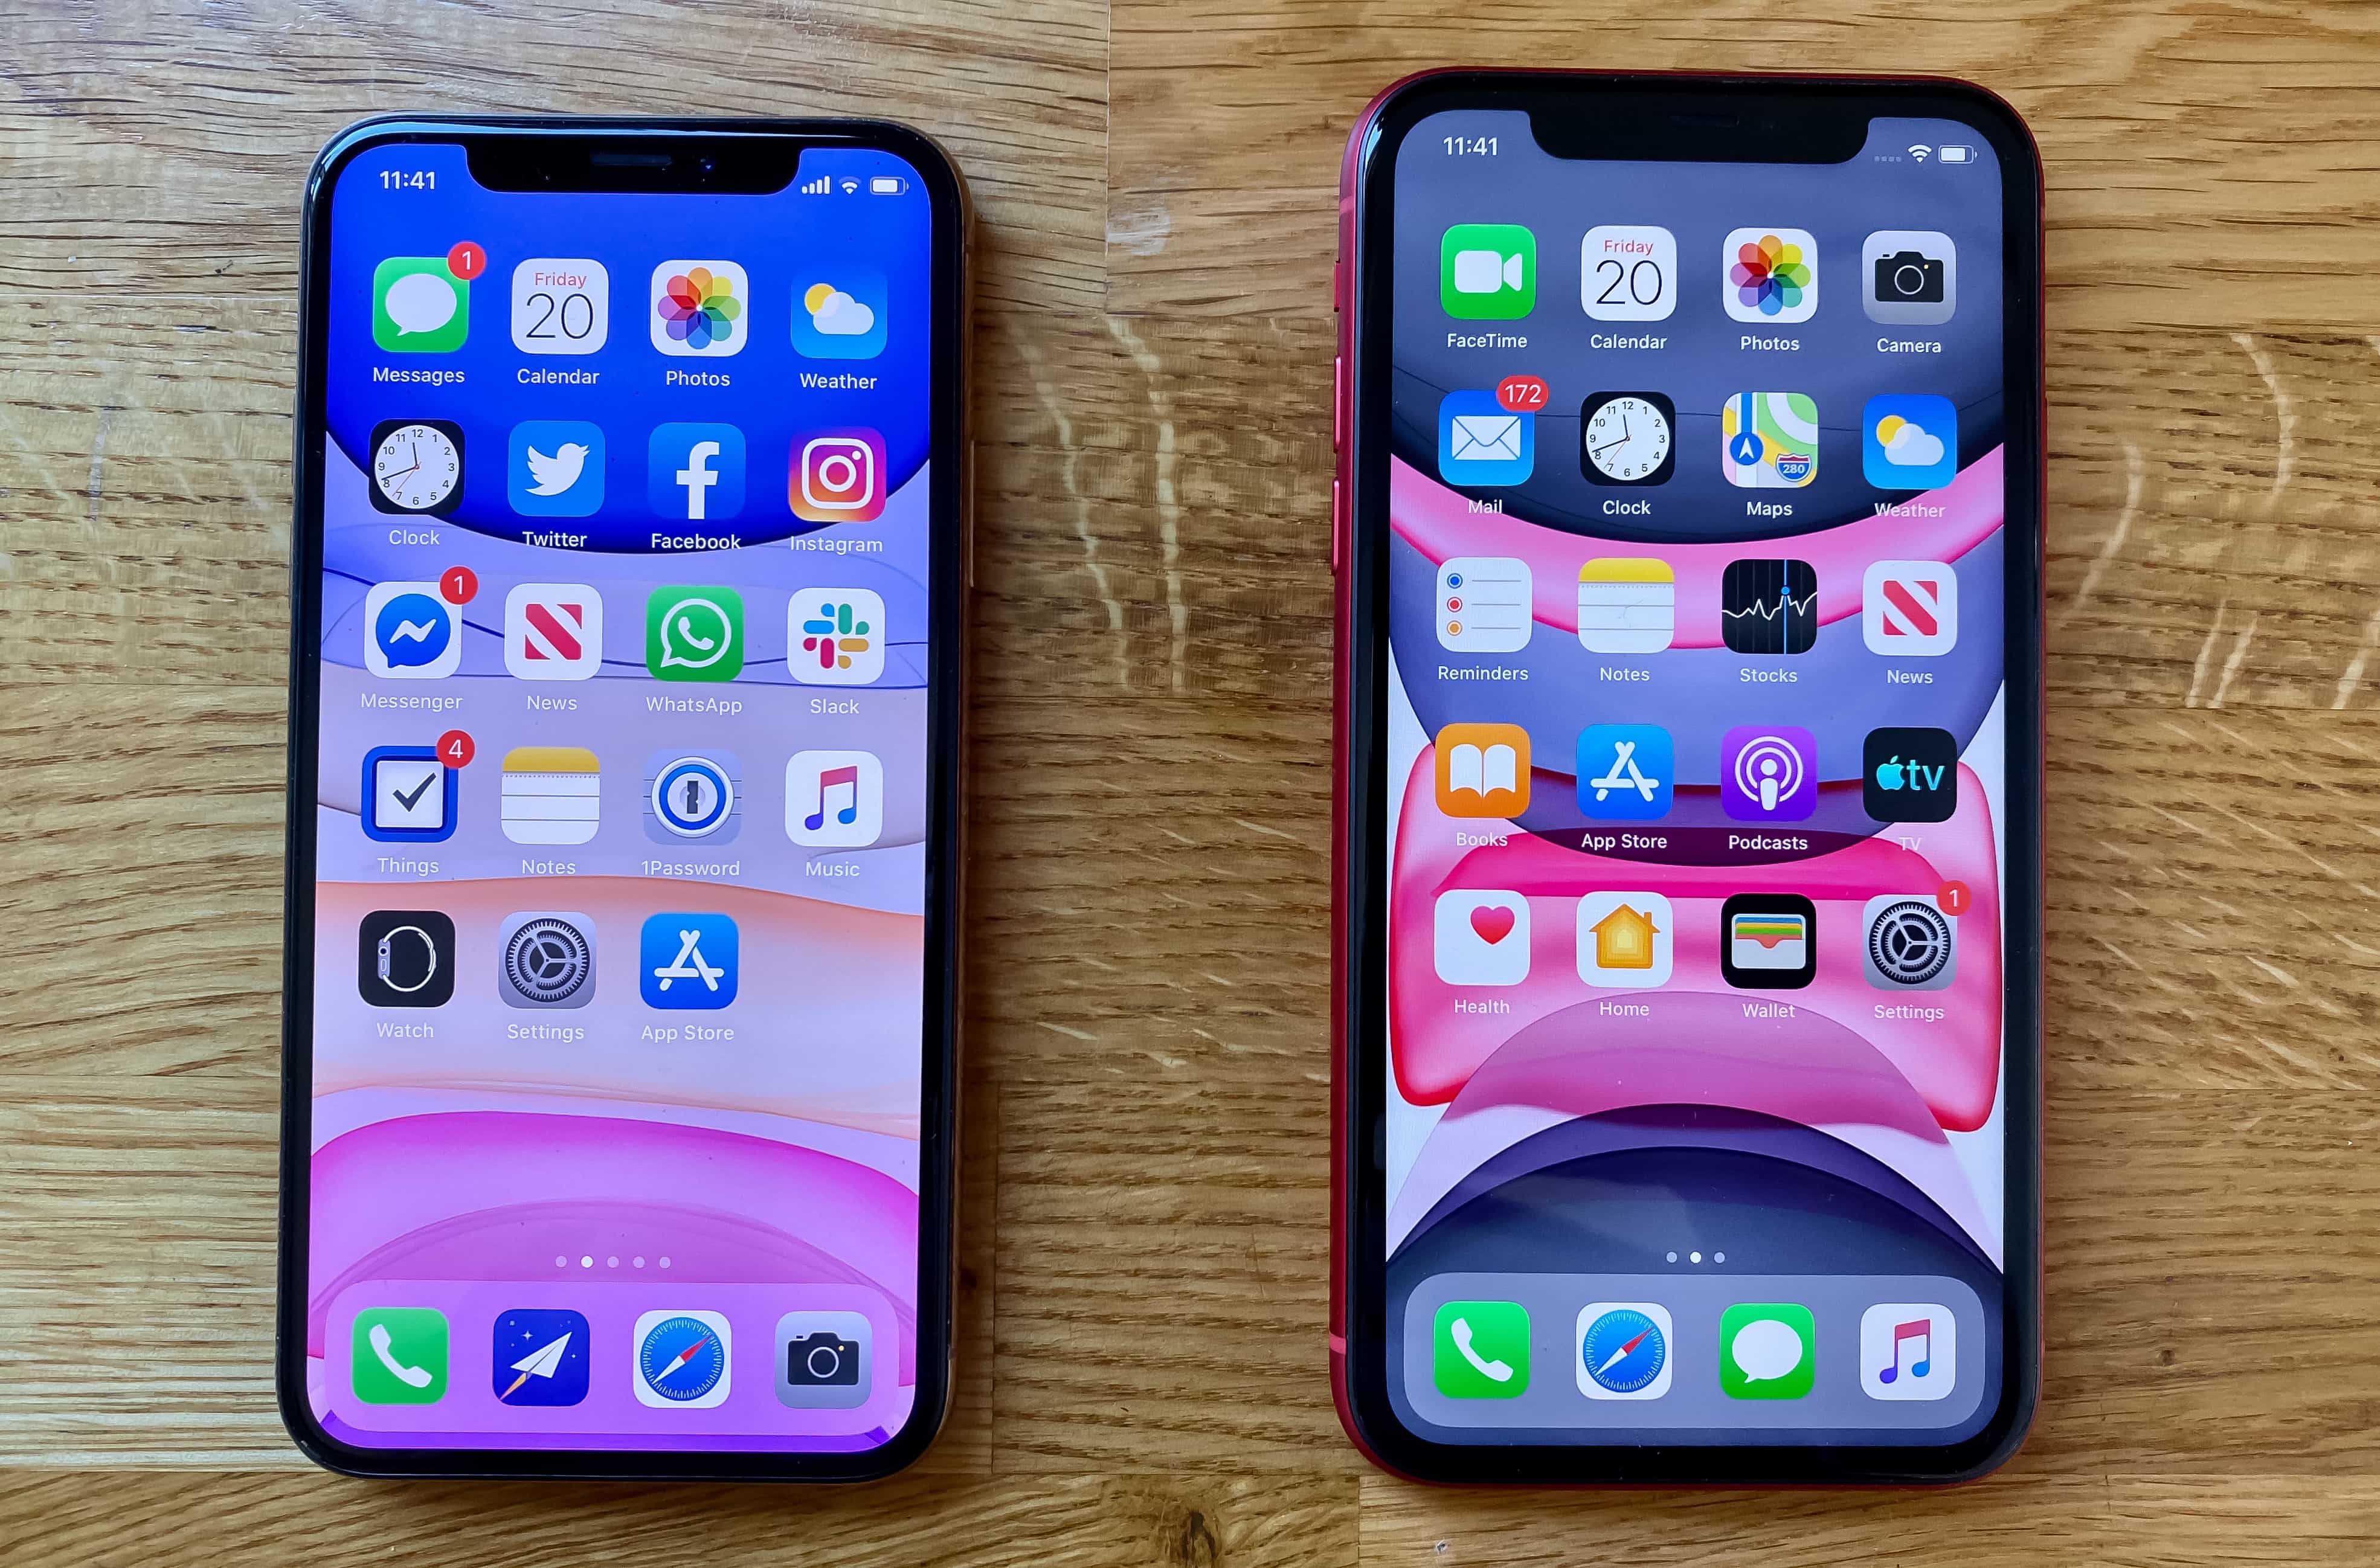 Get your new iPhone or Apple Watch set up properly. Then master the ins and outs of iOS 13